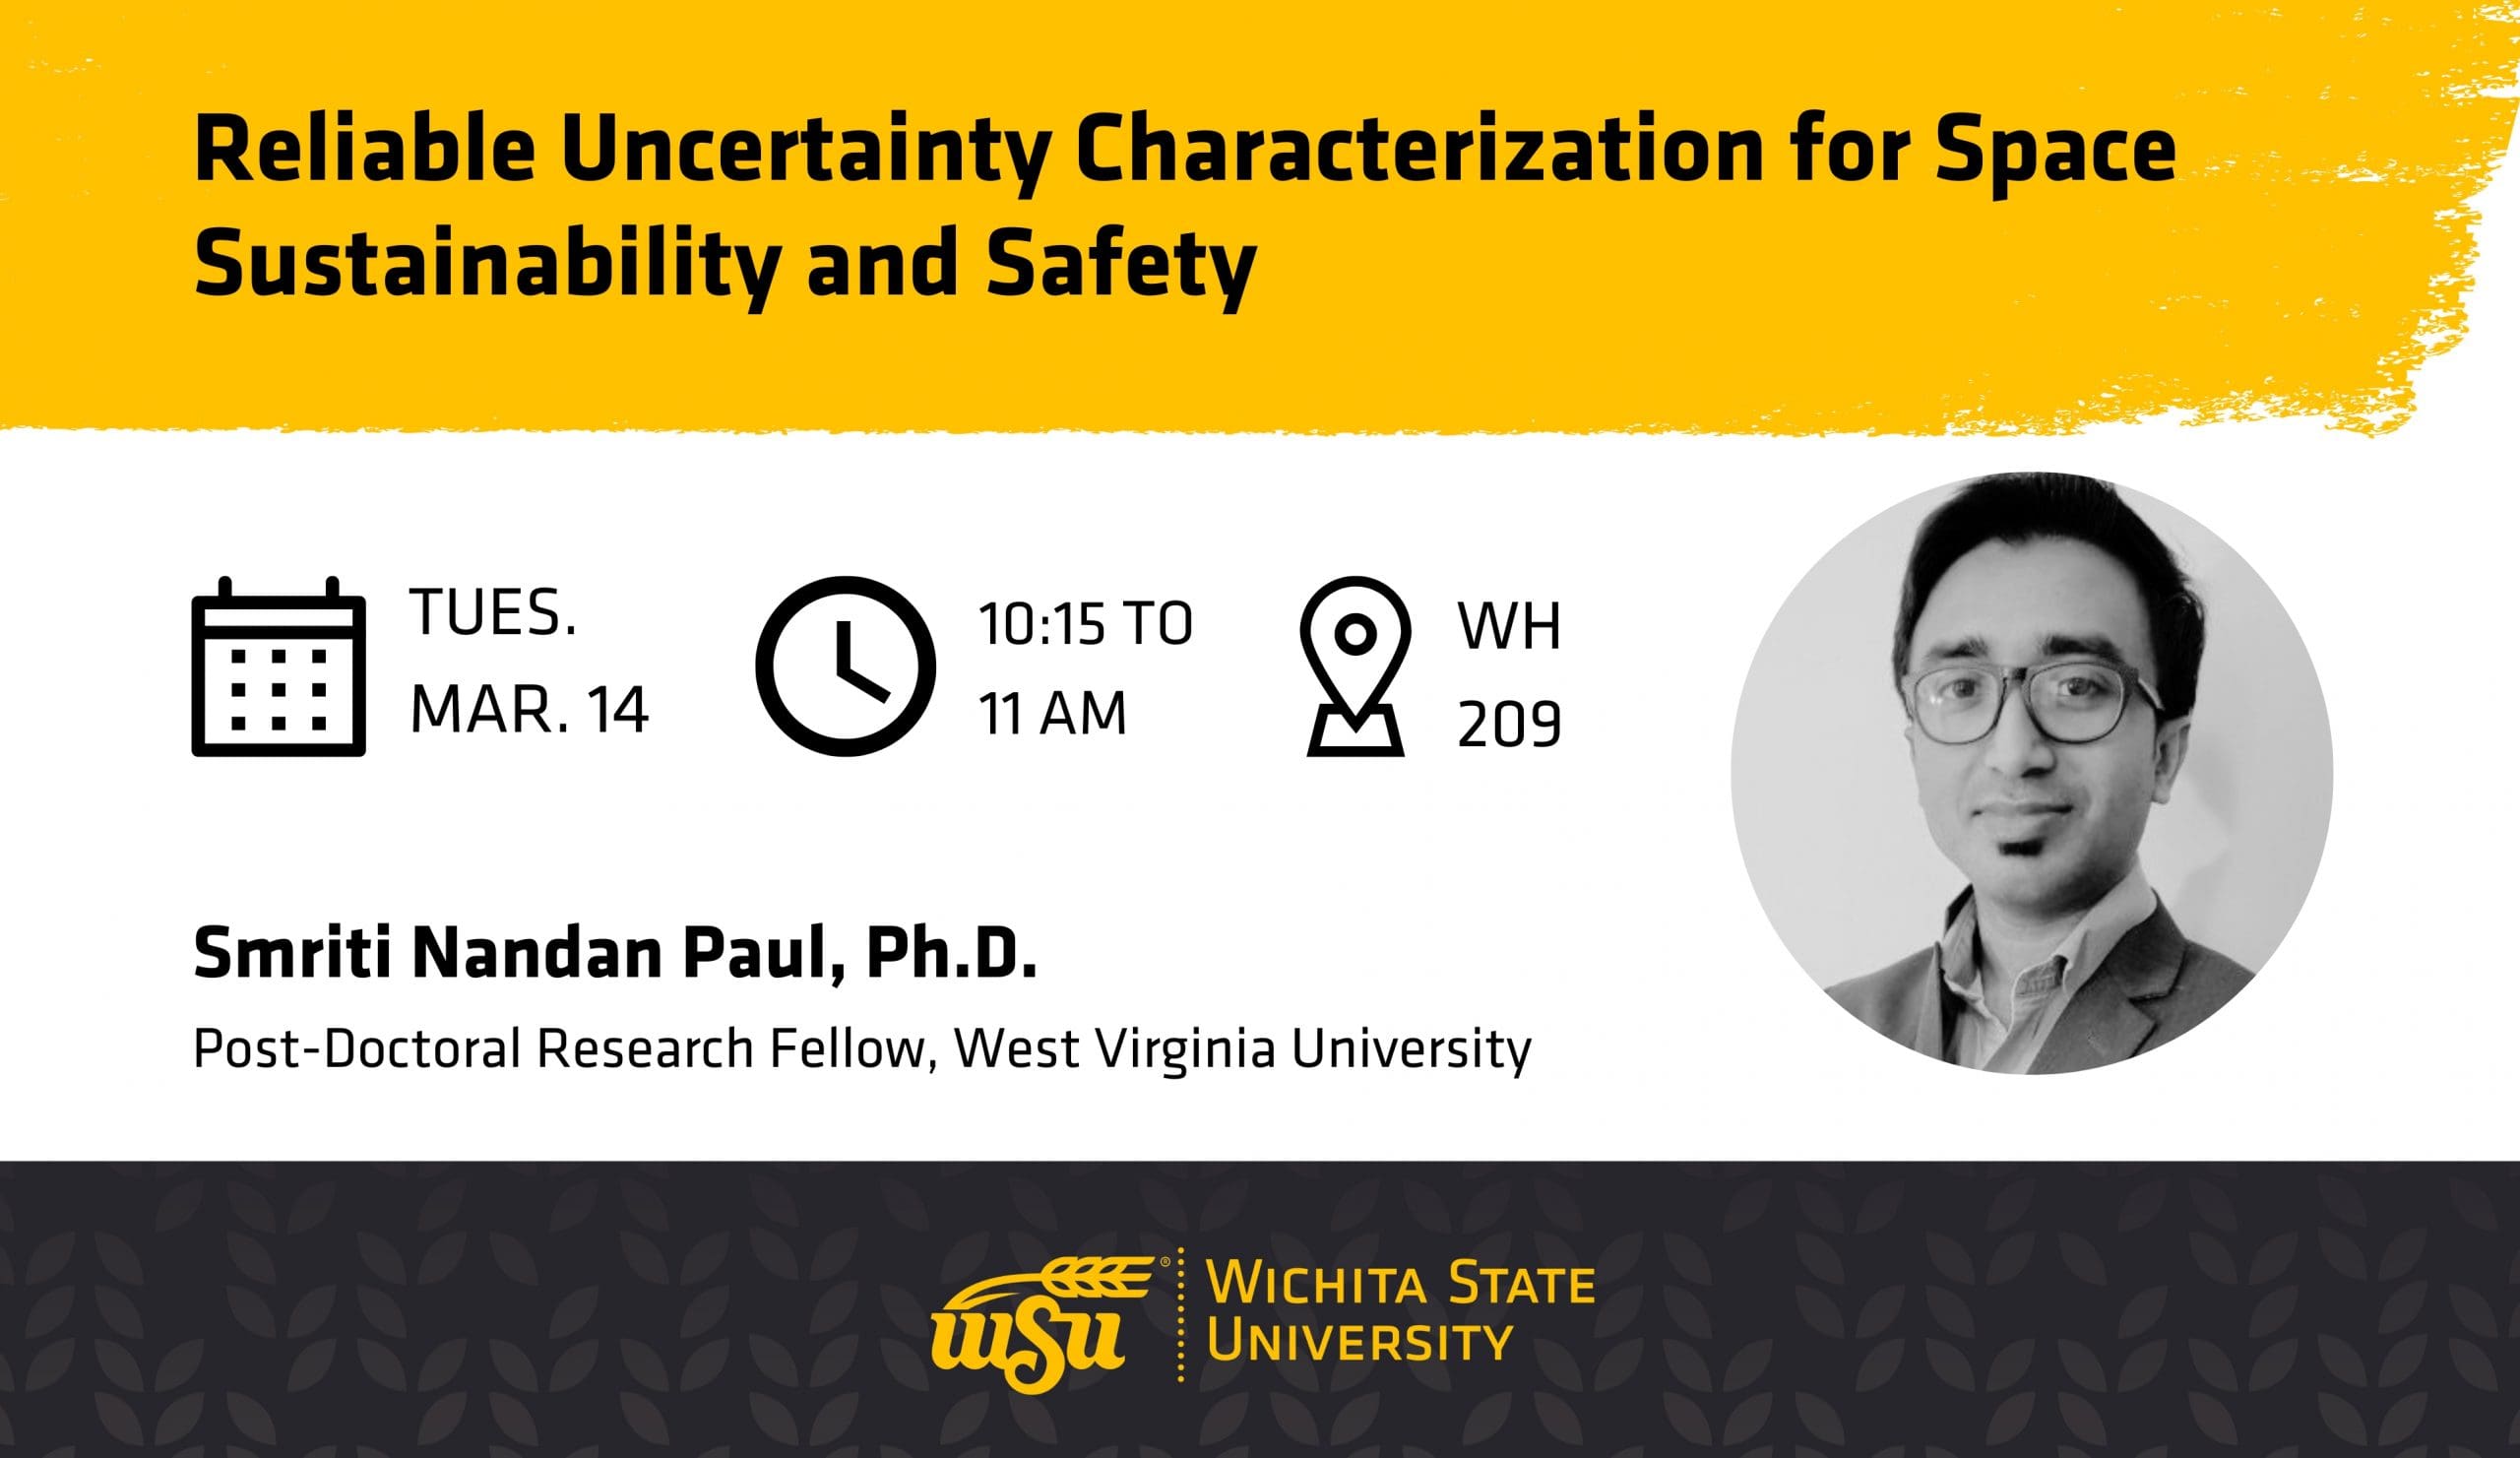 Reliable Uncertainty Characterization for Space Sustainability and Safety | Tuesday, March 14 | 10:15 to 11 am | WH 209 | Smriti Nandan Paul, Ph.D., Post-Doctoral Research Fellow, West Virginia University